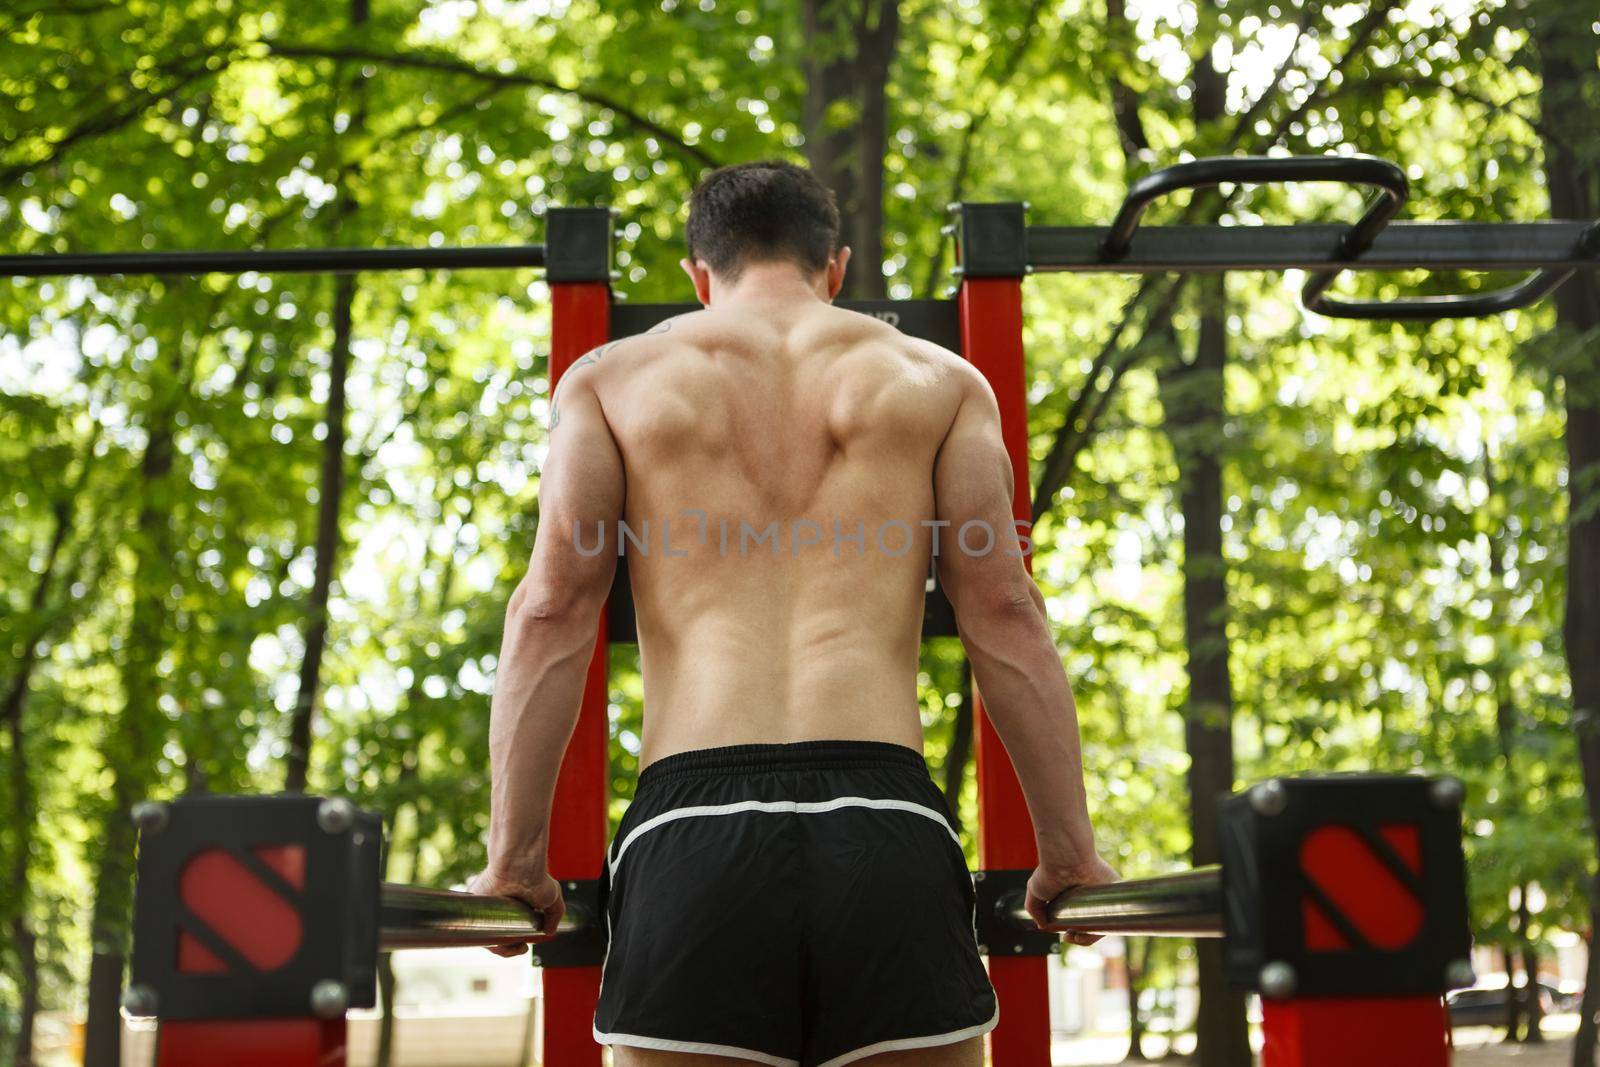 Rear view shot of an athlete with muscular back exercising on calisthenics playground